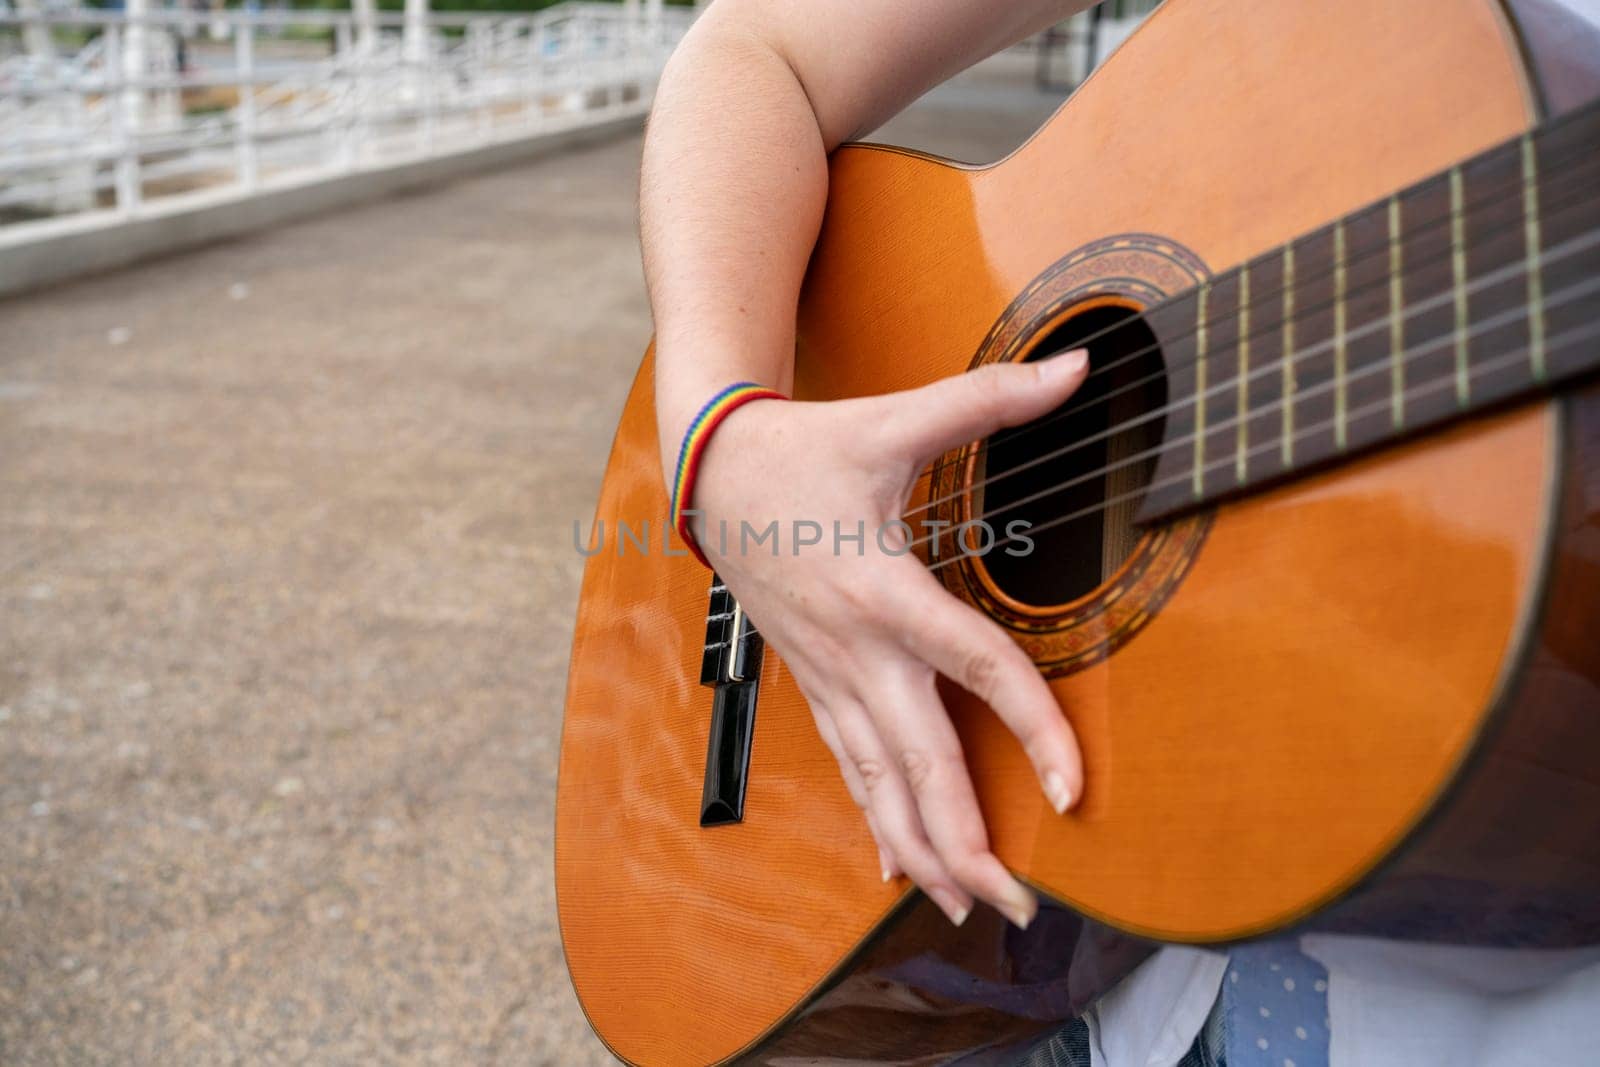 Crop anonymous female guitarist with LGBT wristband playing acoustic guitar while performing song on city street